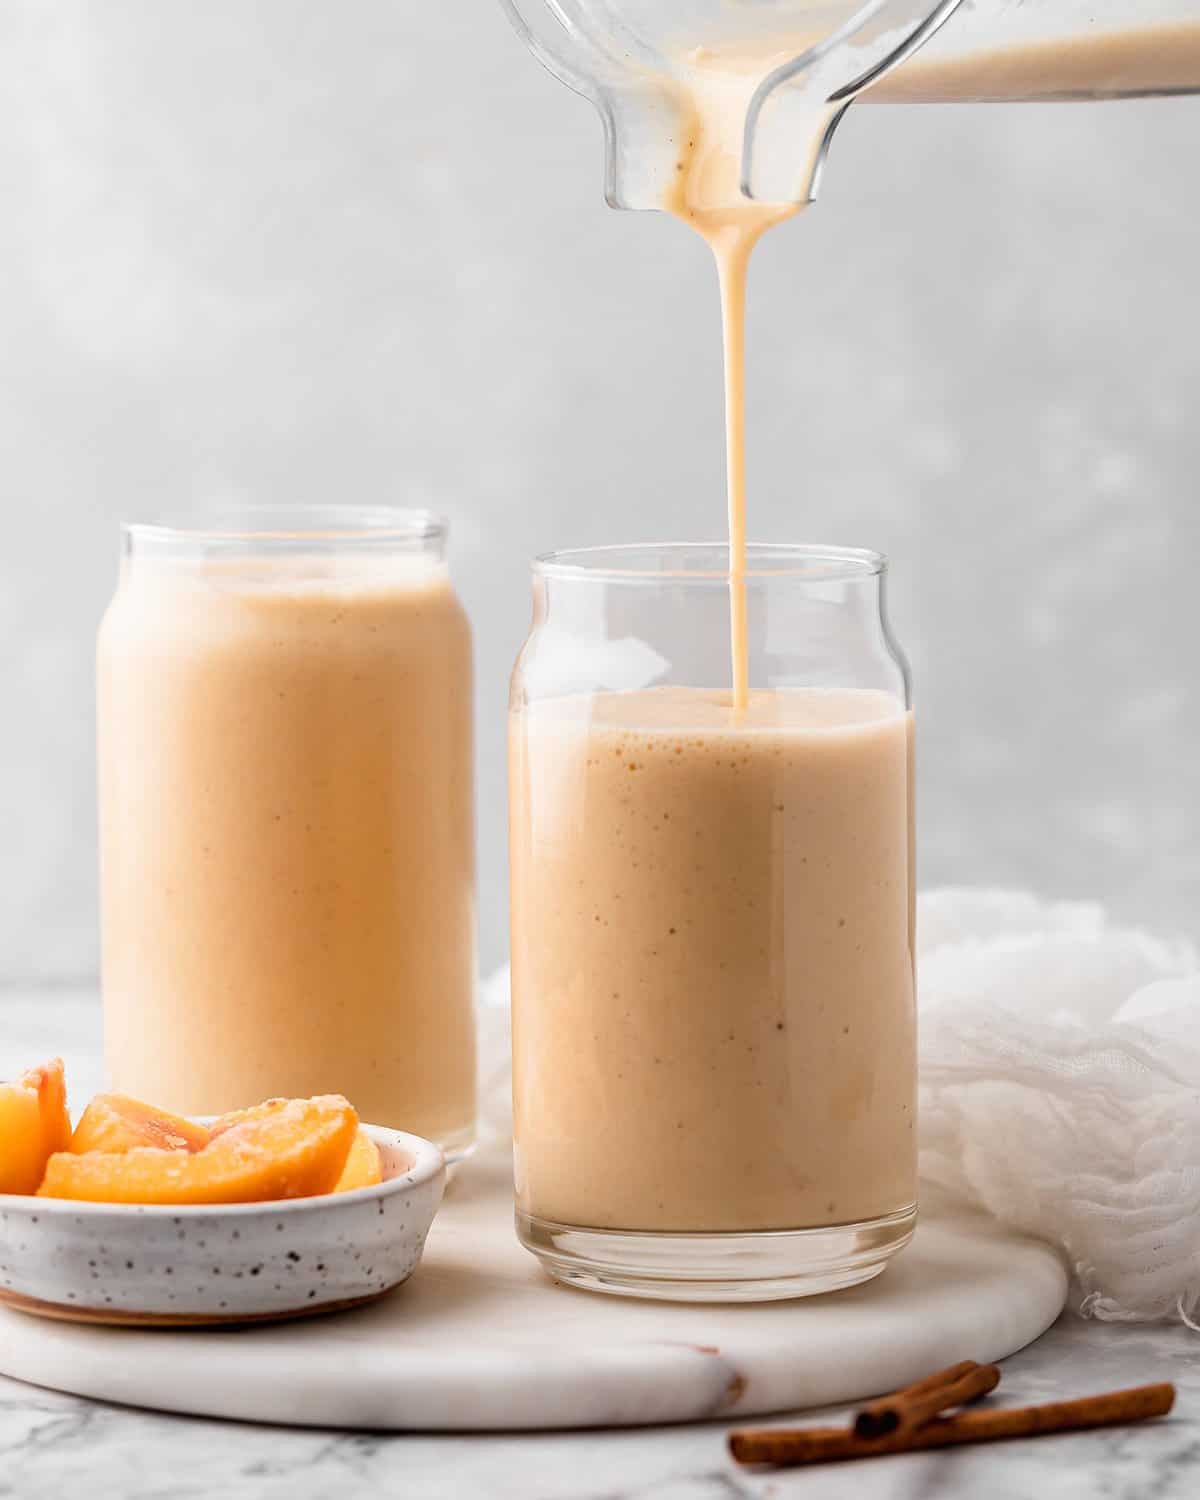 Banana Peach Smoothie being poured into a glass